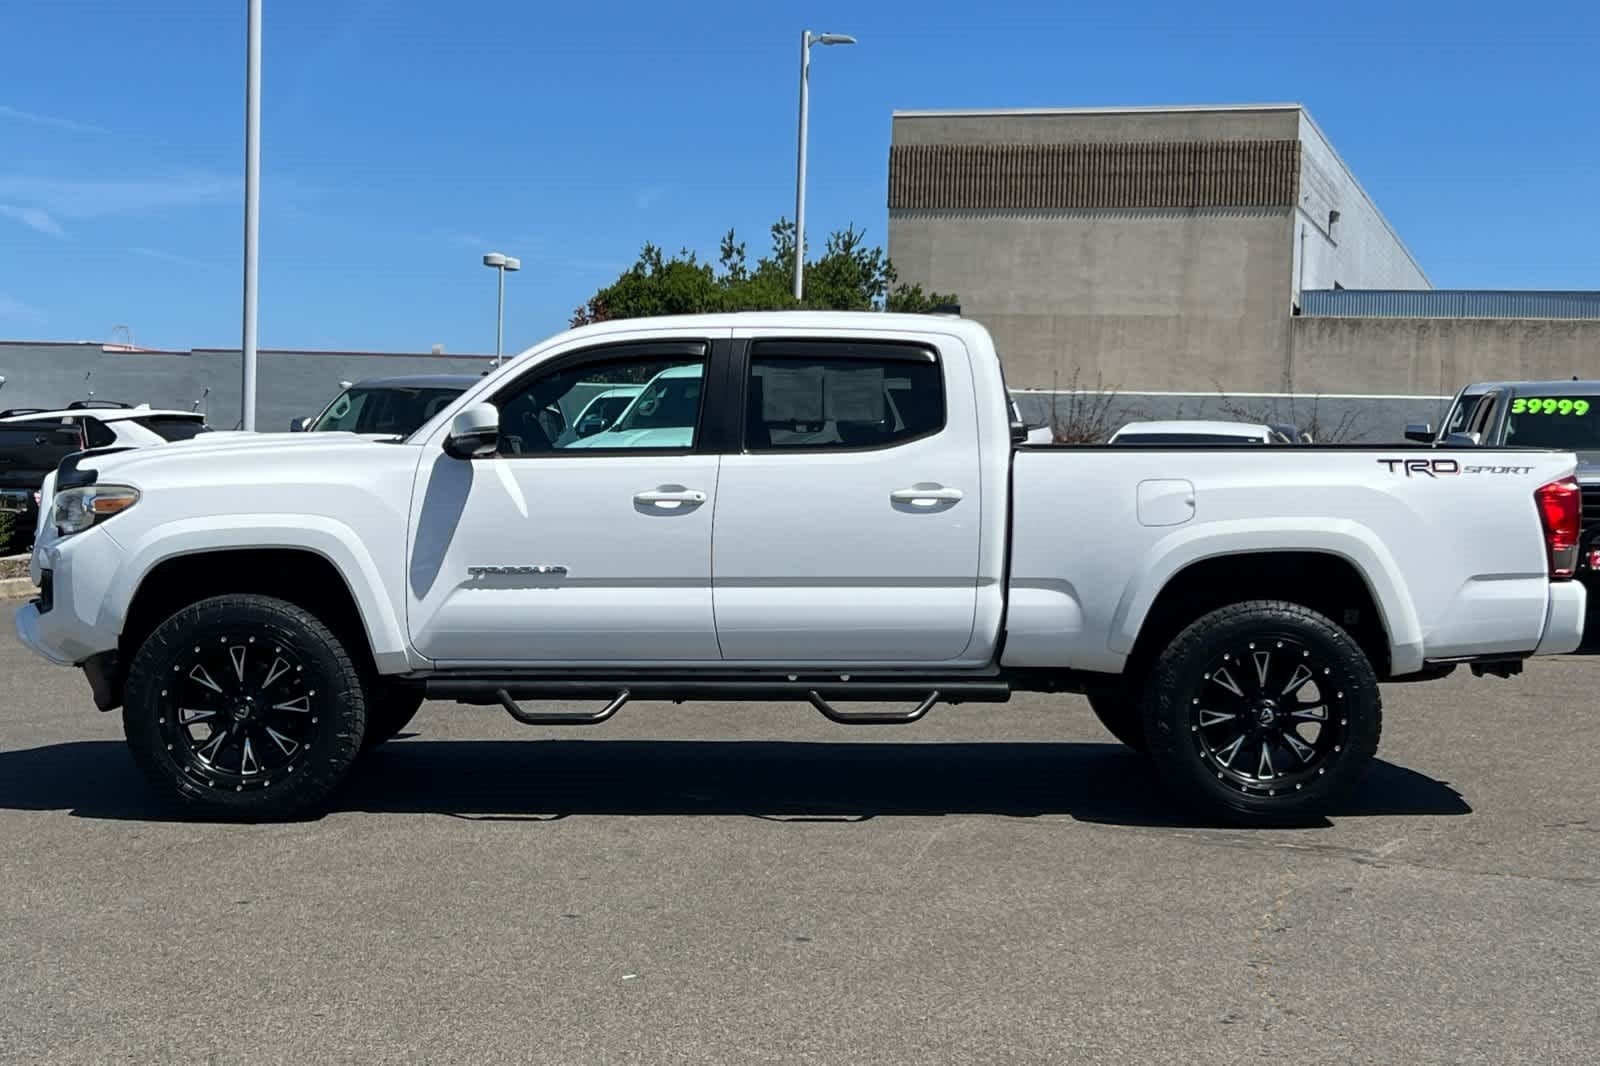 2016 Toyota Tacoma TRD Sport 2WD Double Cab LB V6 AT